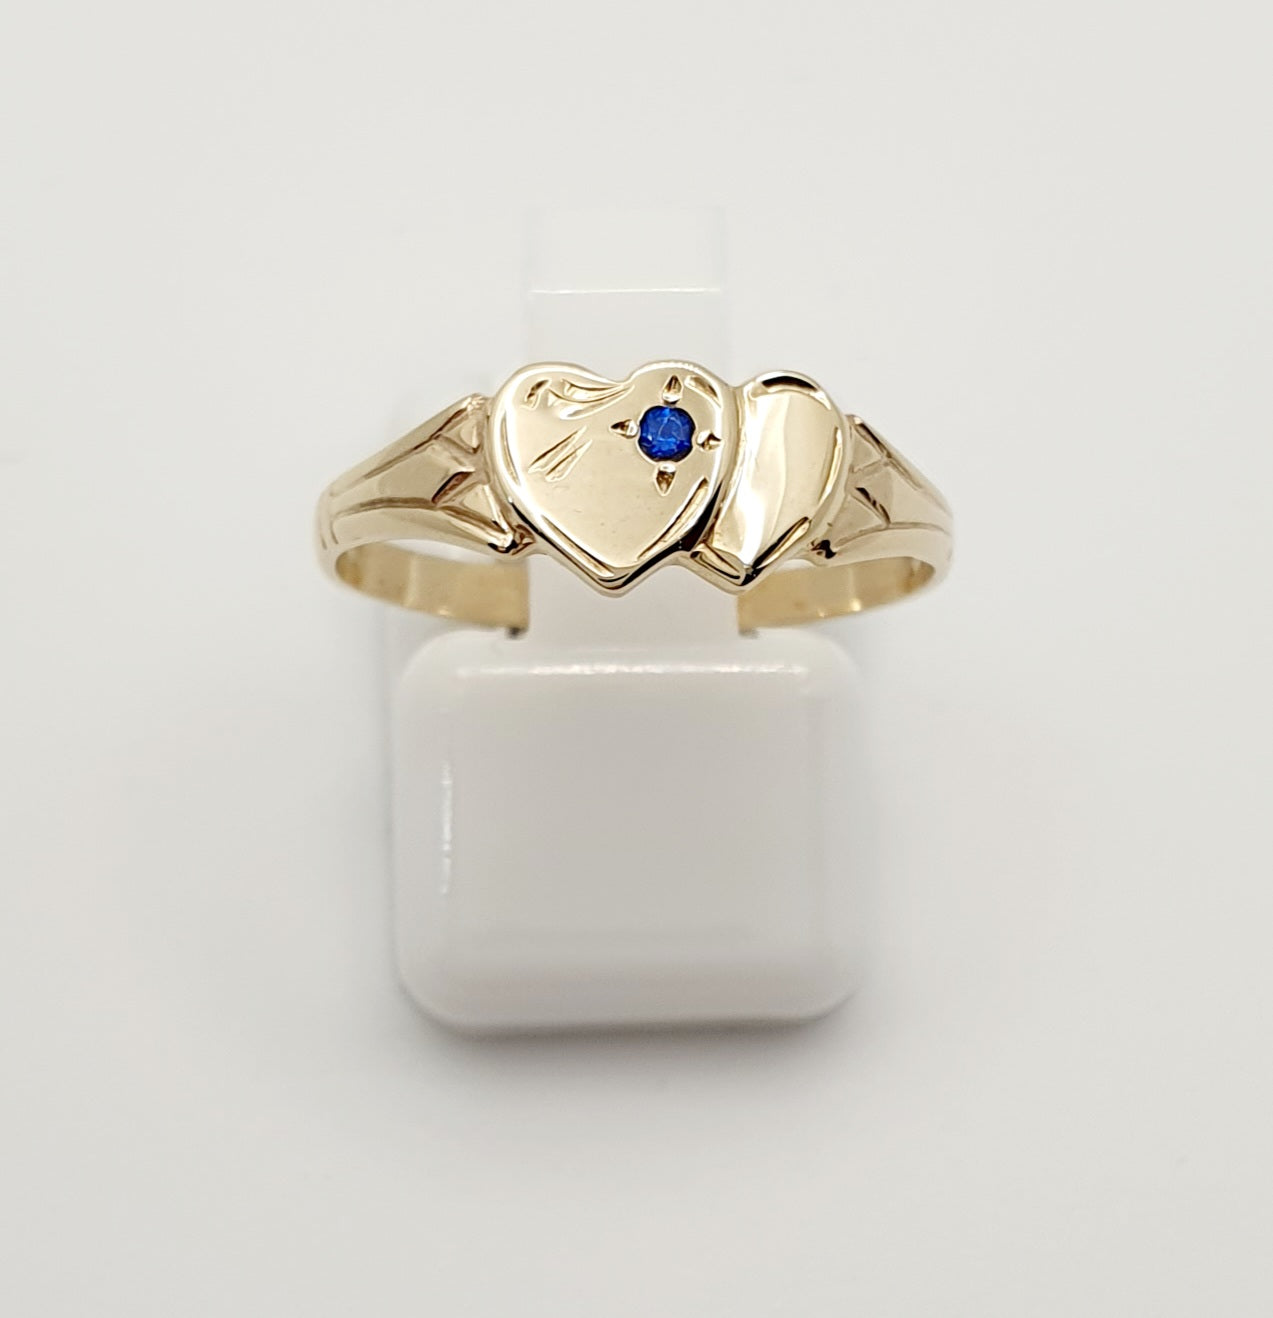 9ct Yellow Gold Signet Ring with Double Heart and Blue Stone. InStock Sizes E 1/2, G, H, M